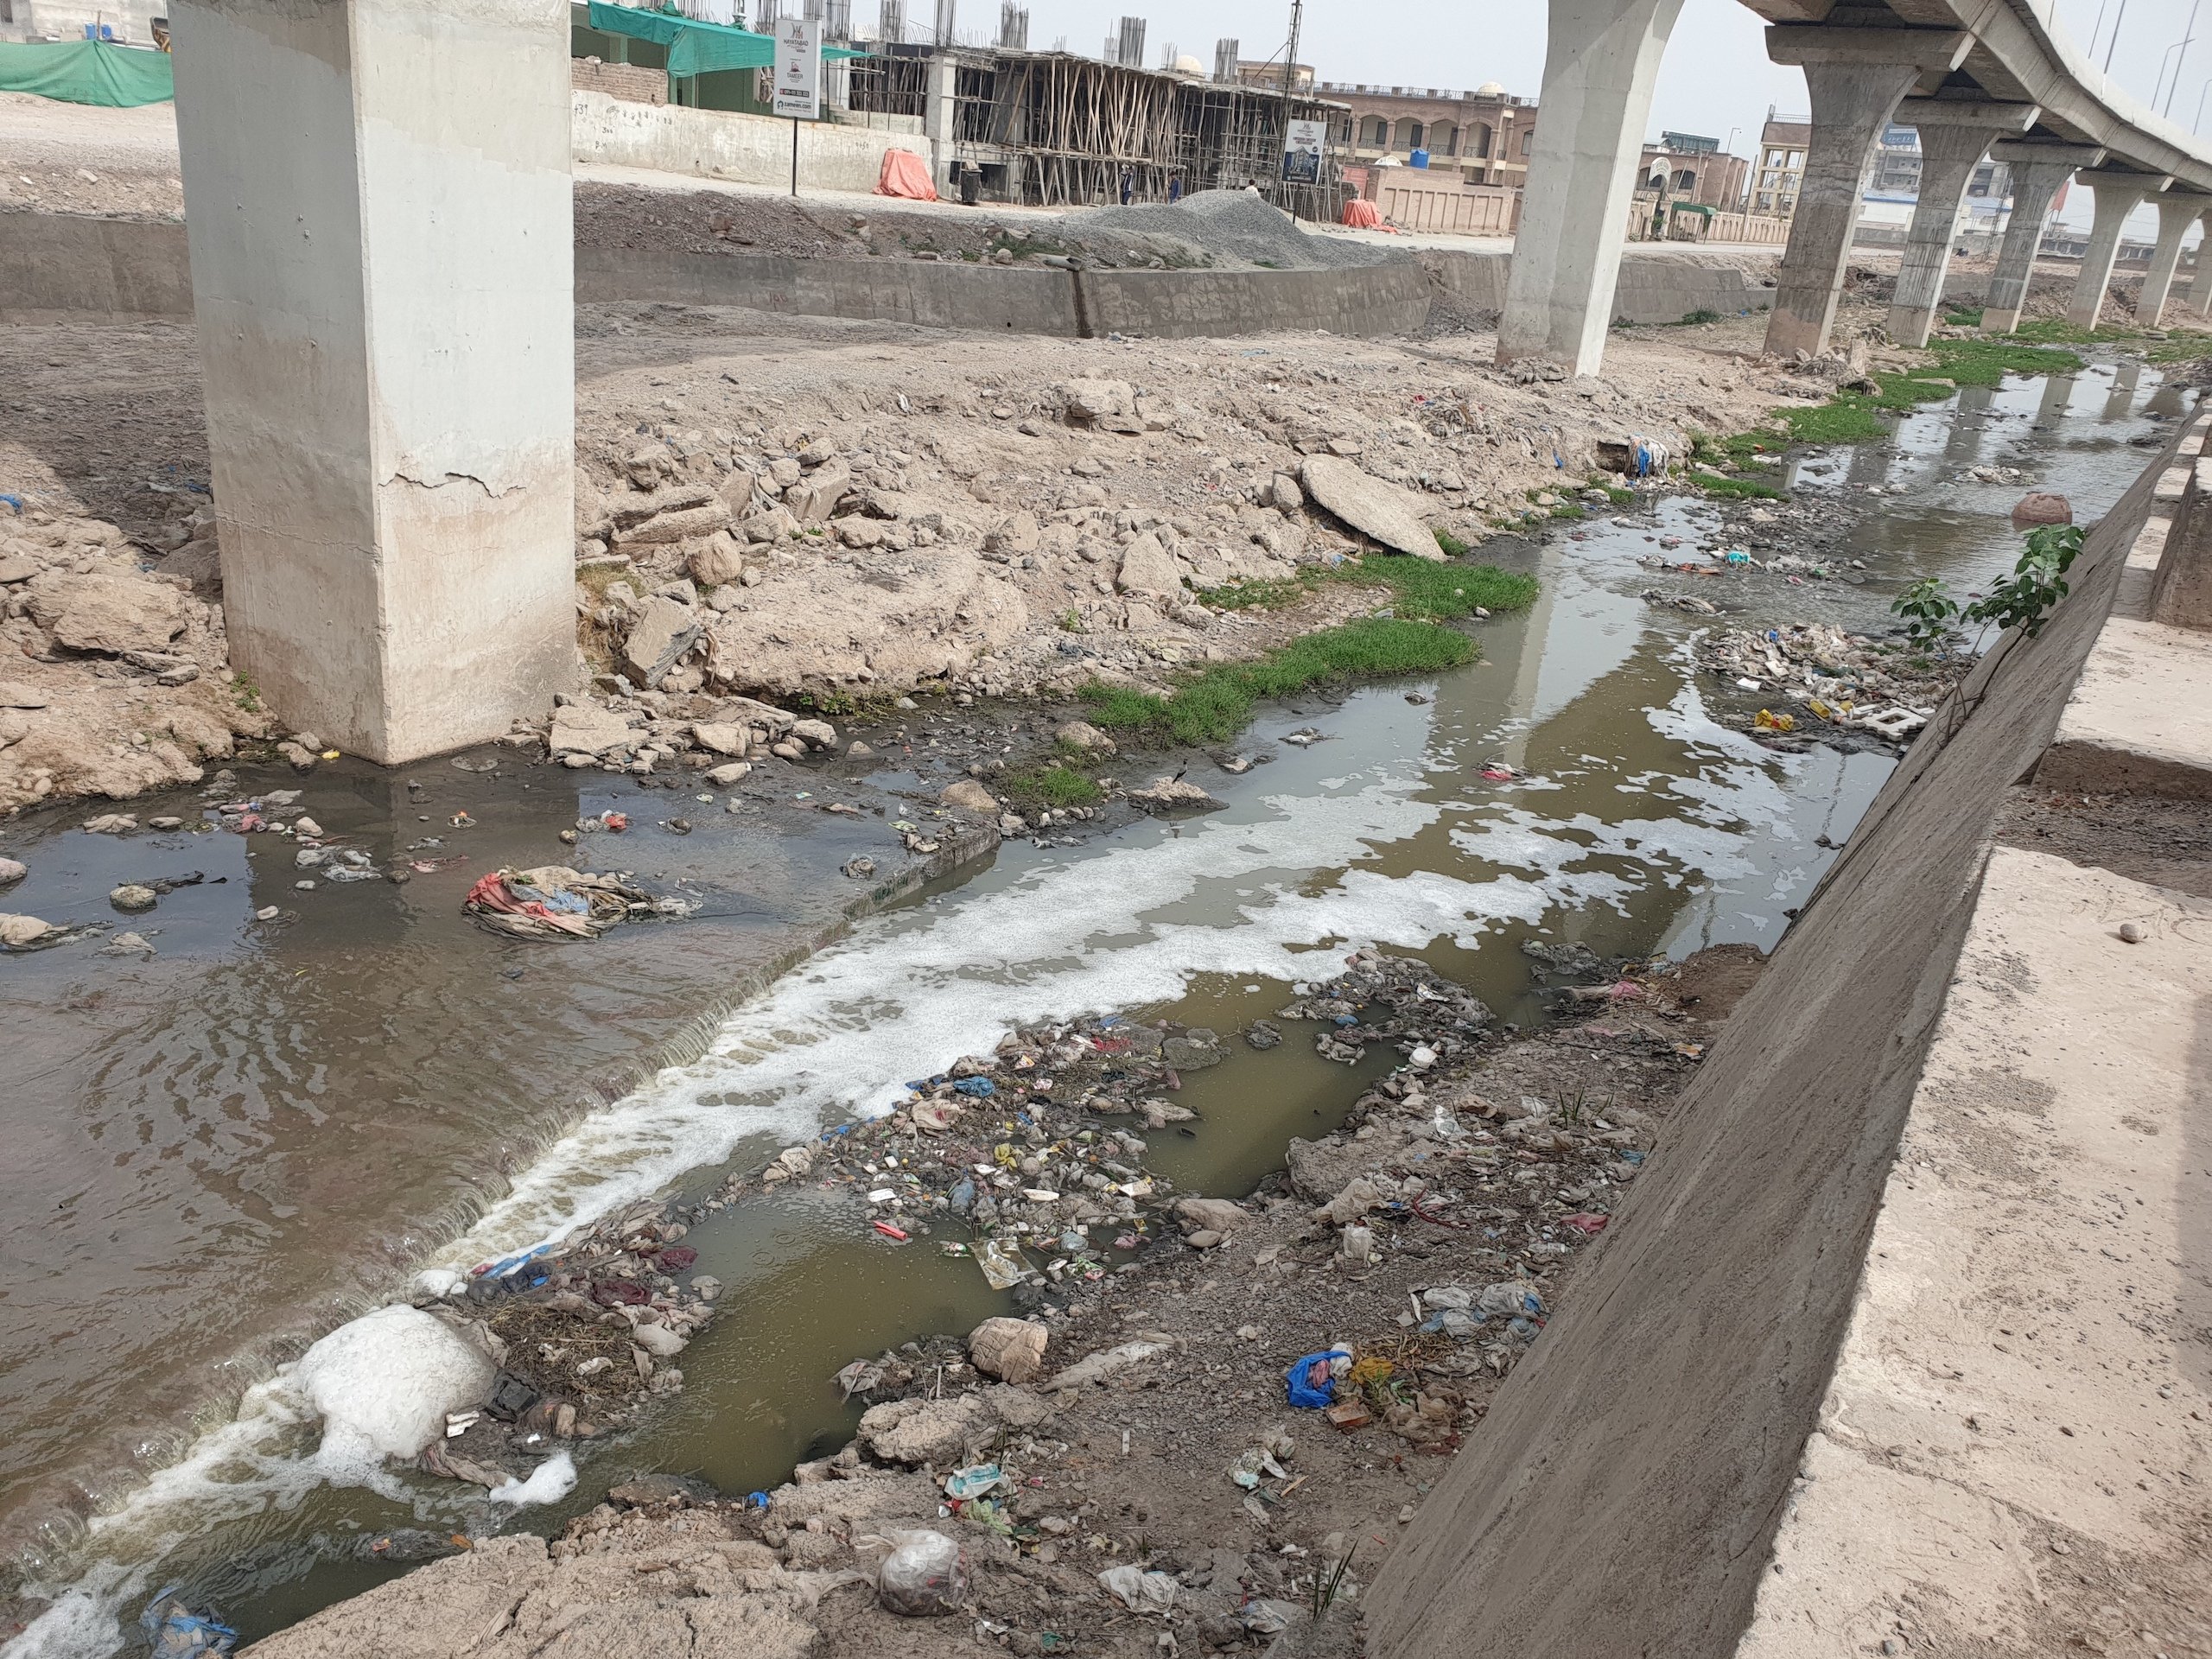 Drain in Peshawar carries untreated wastewater to the Kabul River, Fawad Ali